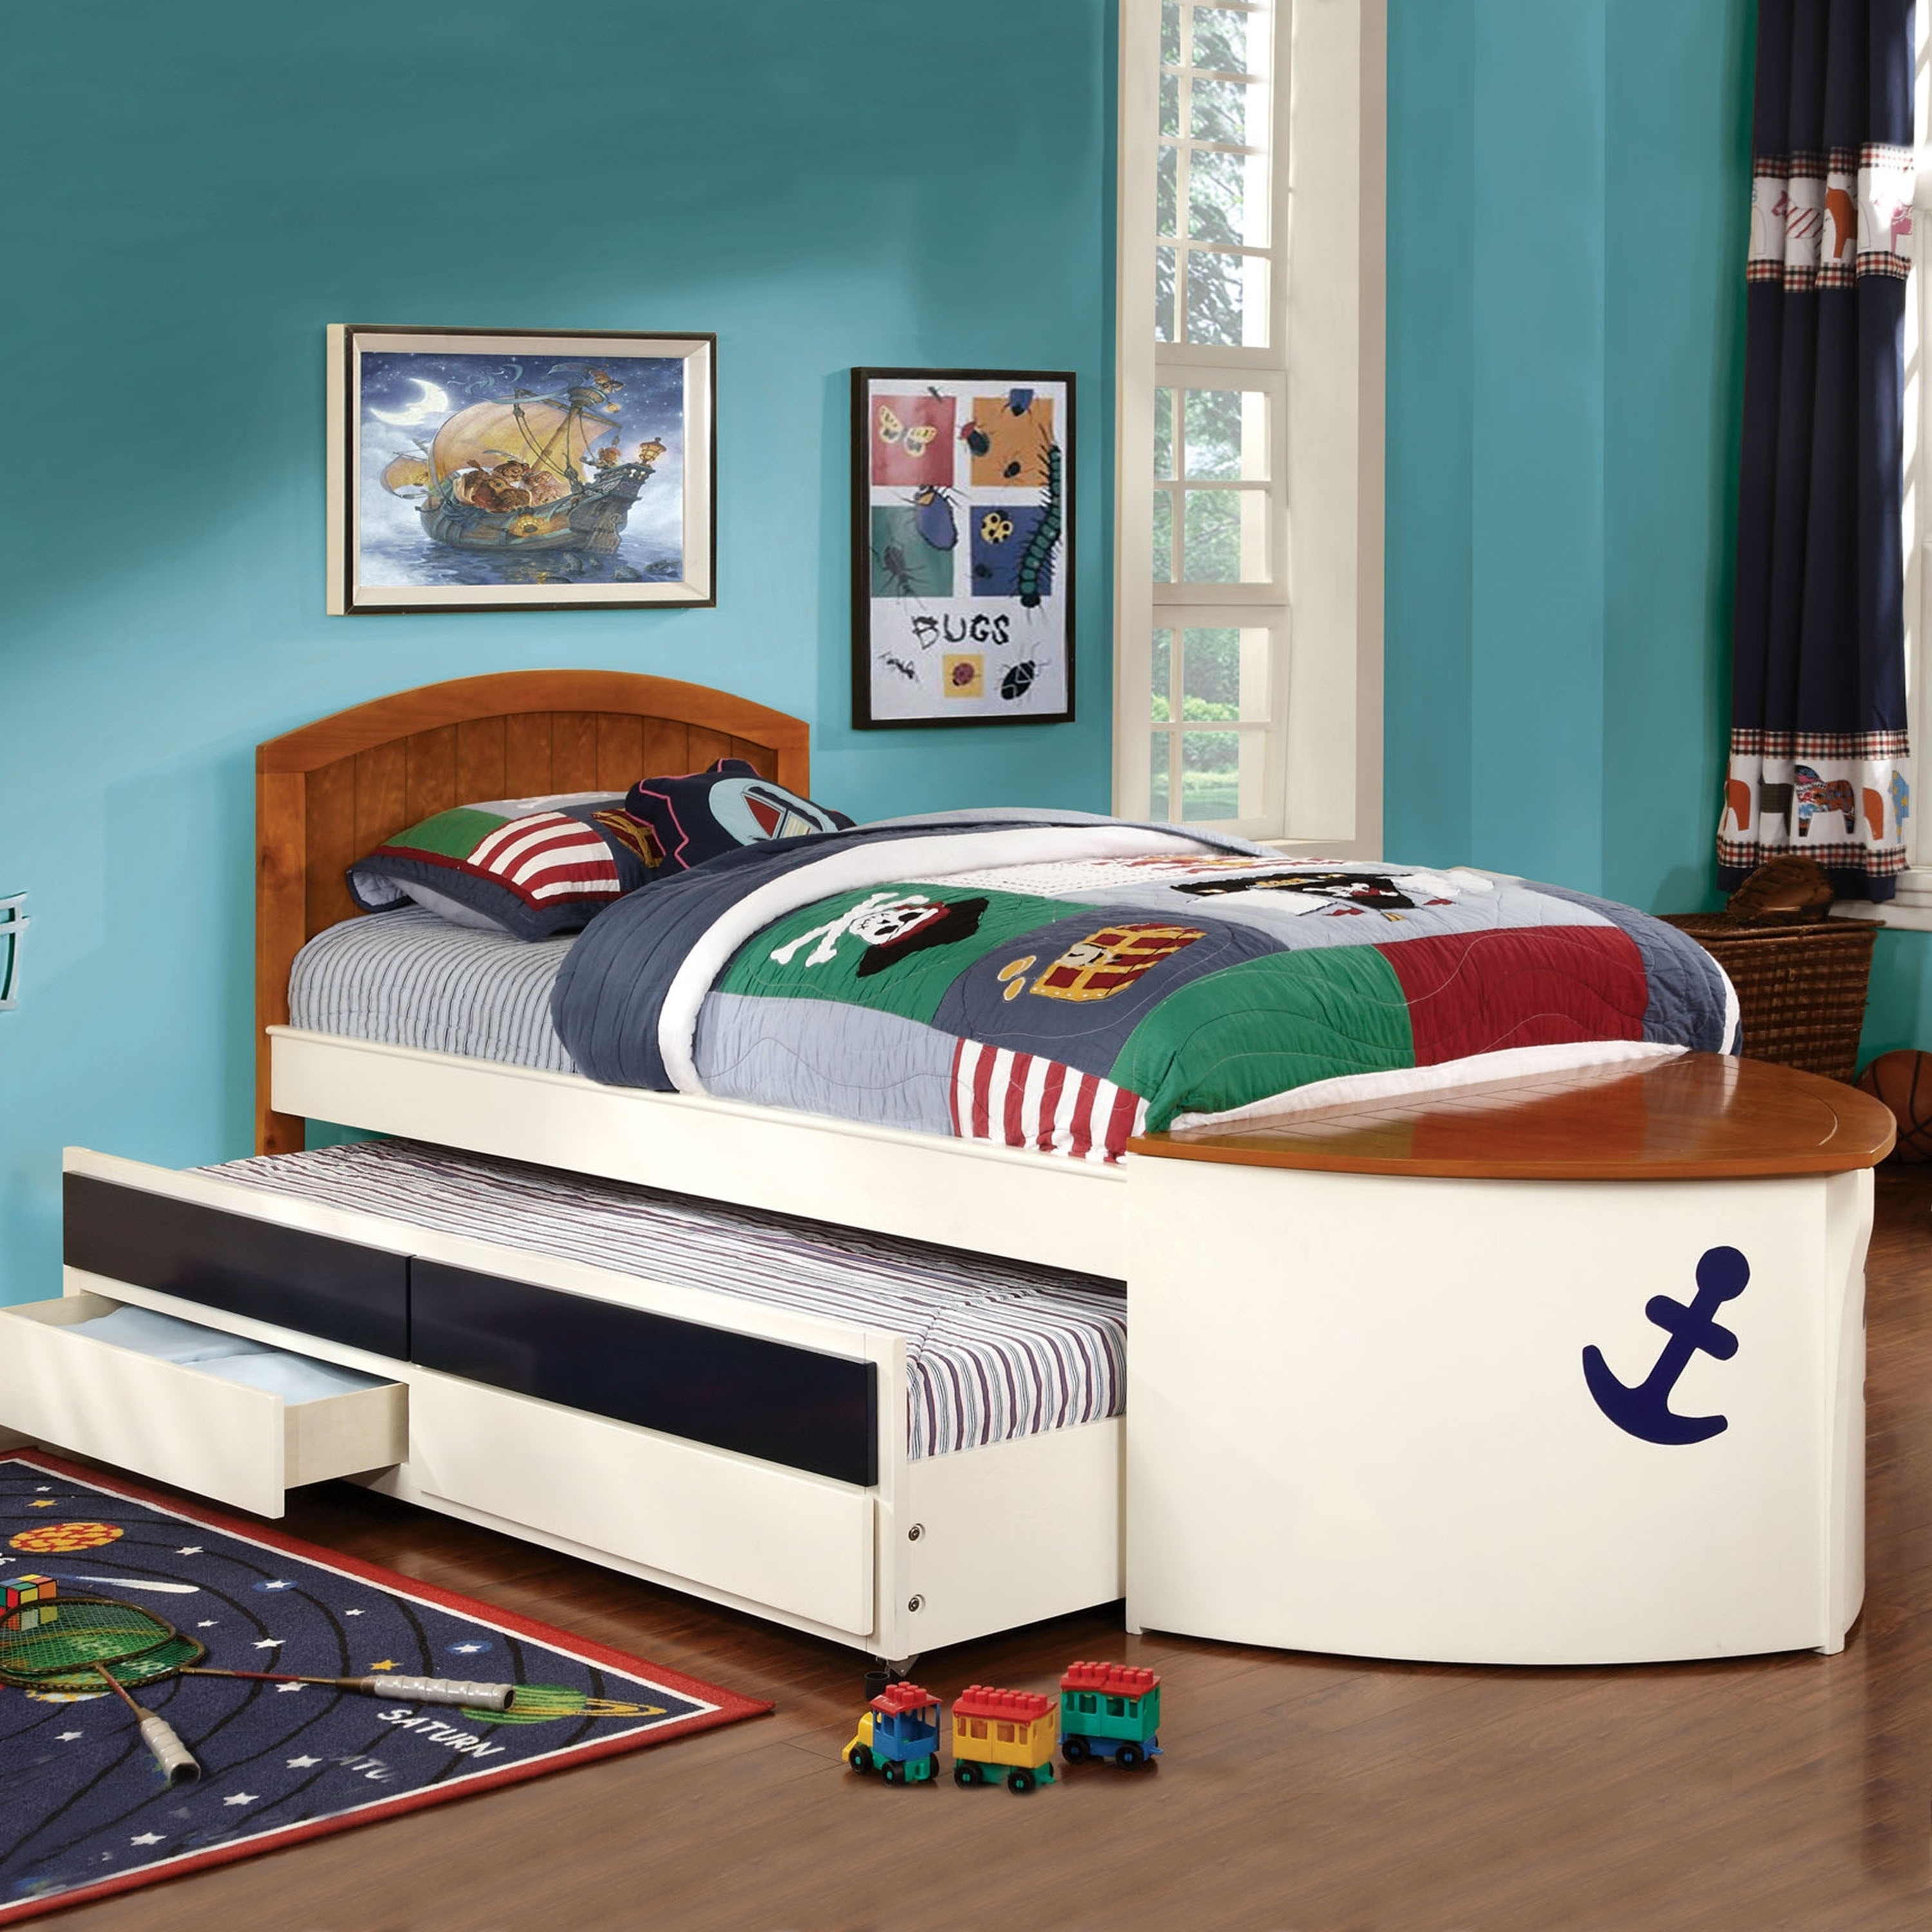 Furniture Of America Furniture Of America Capitaine Boat Twin Bed With Trundle And Storage Navy Size Twin